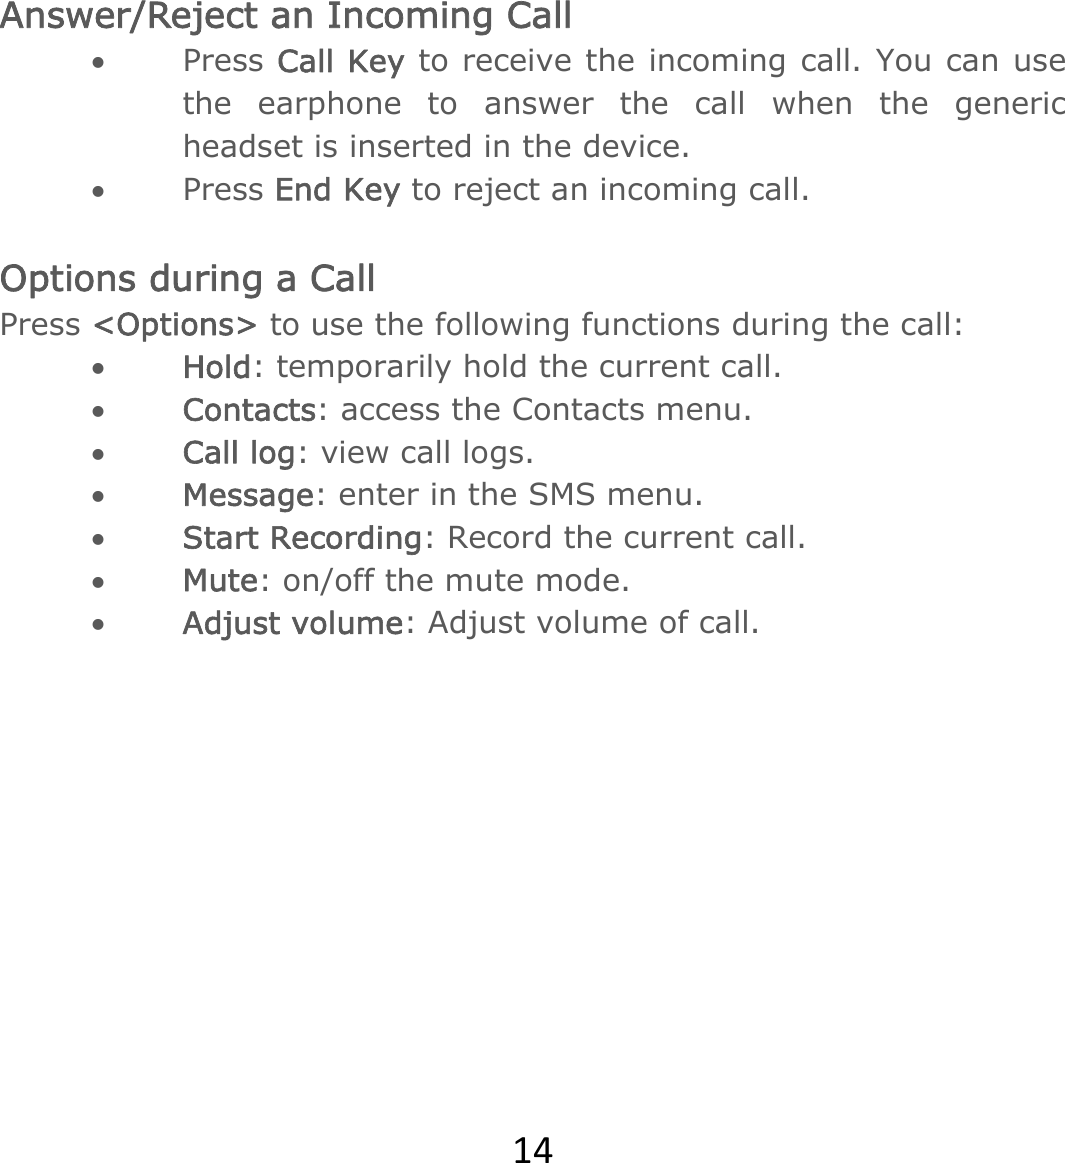 14Answer/Reject an Incoming Call  Press Call Key to receive the incoming call. You can use the earphone to answer the call when the generic headset is inserted in the device.    Press End Key to reject an incoming call.  Options during a Call   Press &lt;Options&gt; to use the following functions during the call:  Hold: temporarily hold the current call.  Contacts: access the Contacts menu.   Call log: view call logs.  Message: enter in the SMS menu.  Start Recording: Record the current call.  Mute: on/off the mute mode.  Adjust volume: Adjust volume of call.        